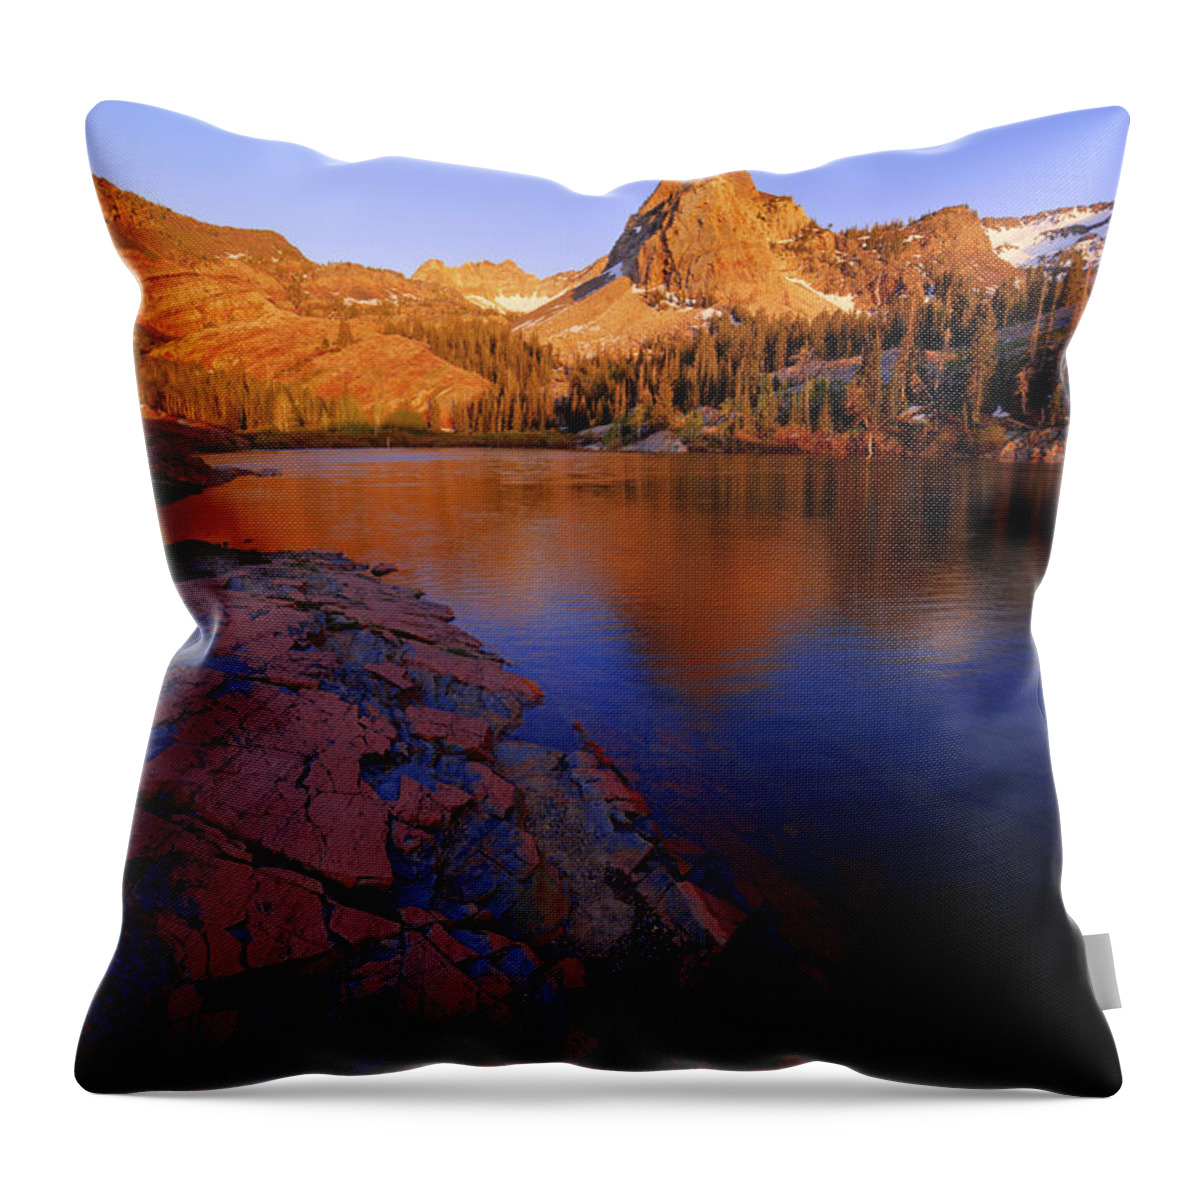 Once Upon A Rock Throw Pillow featuring the photograph Once Upon a Rock by Chad Dutson